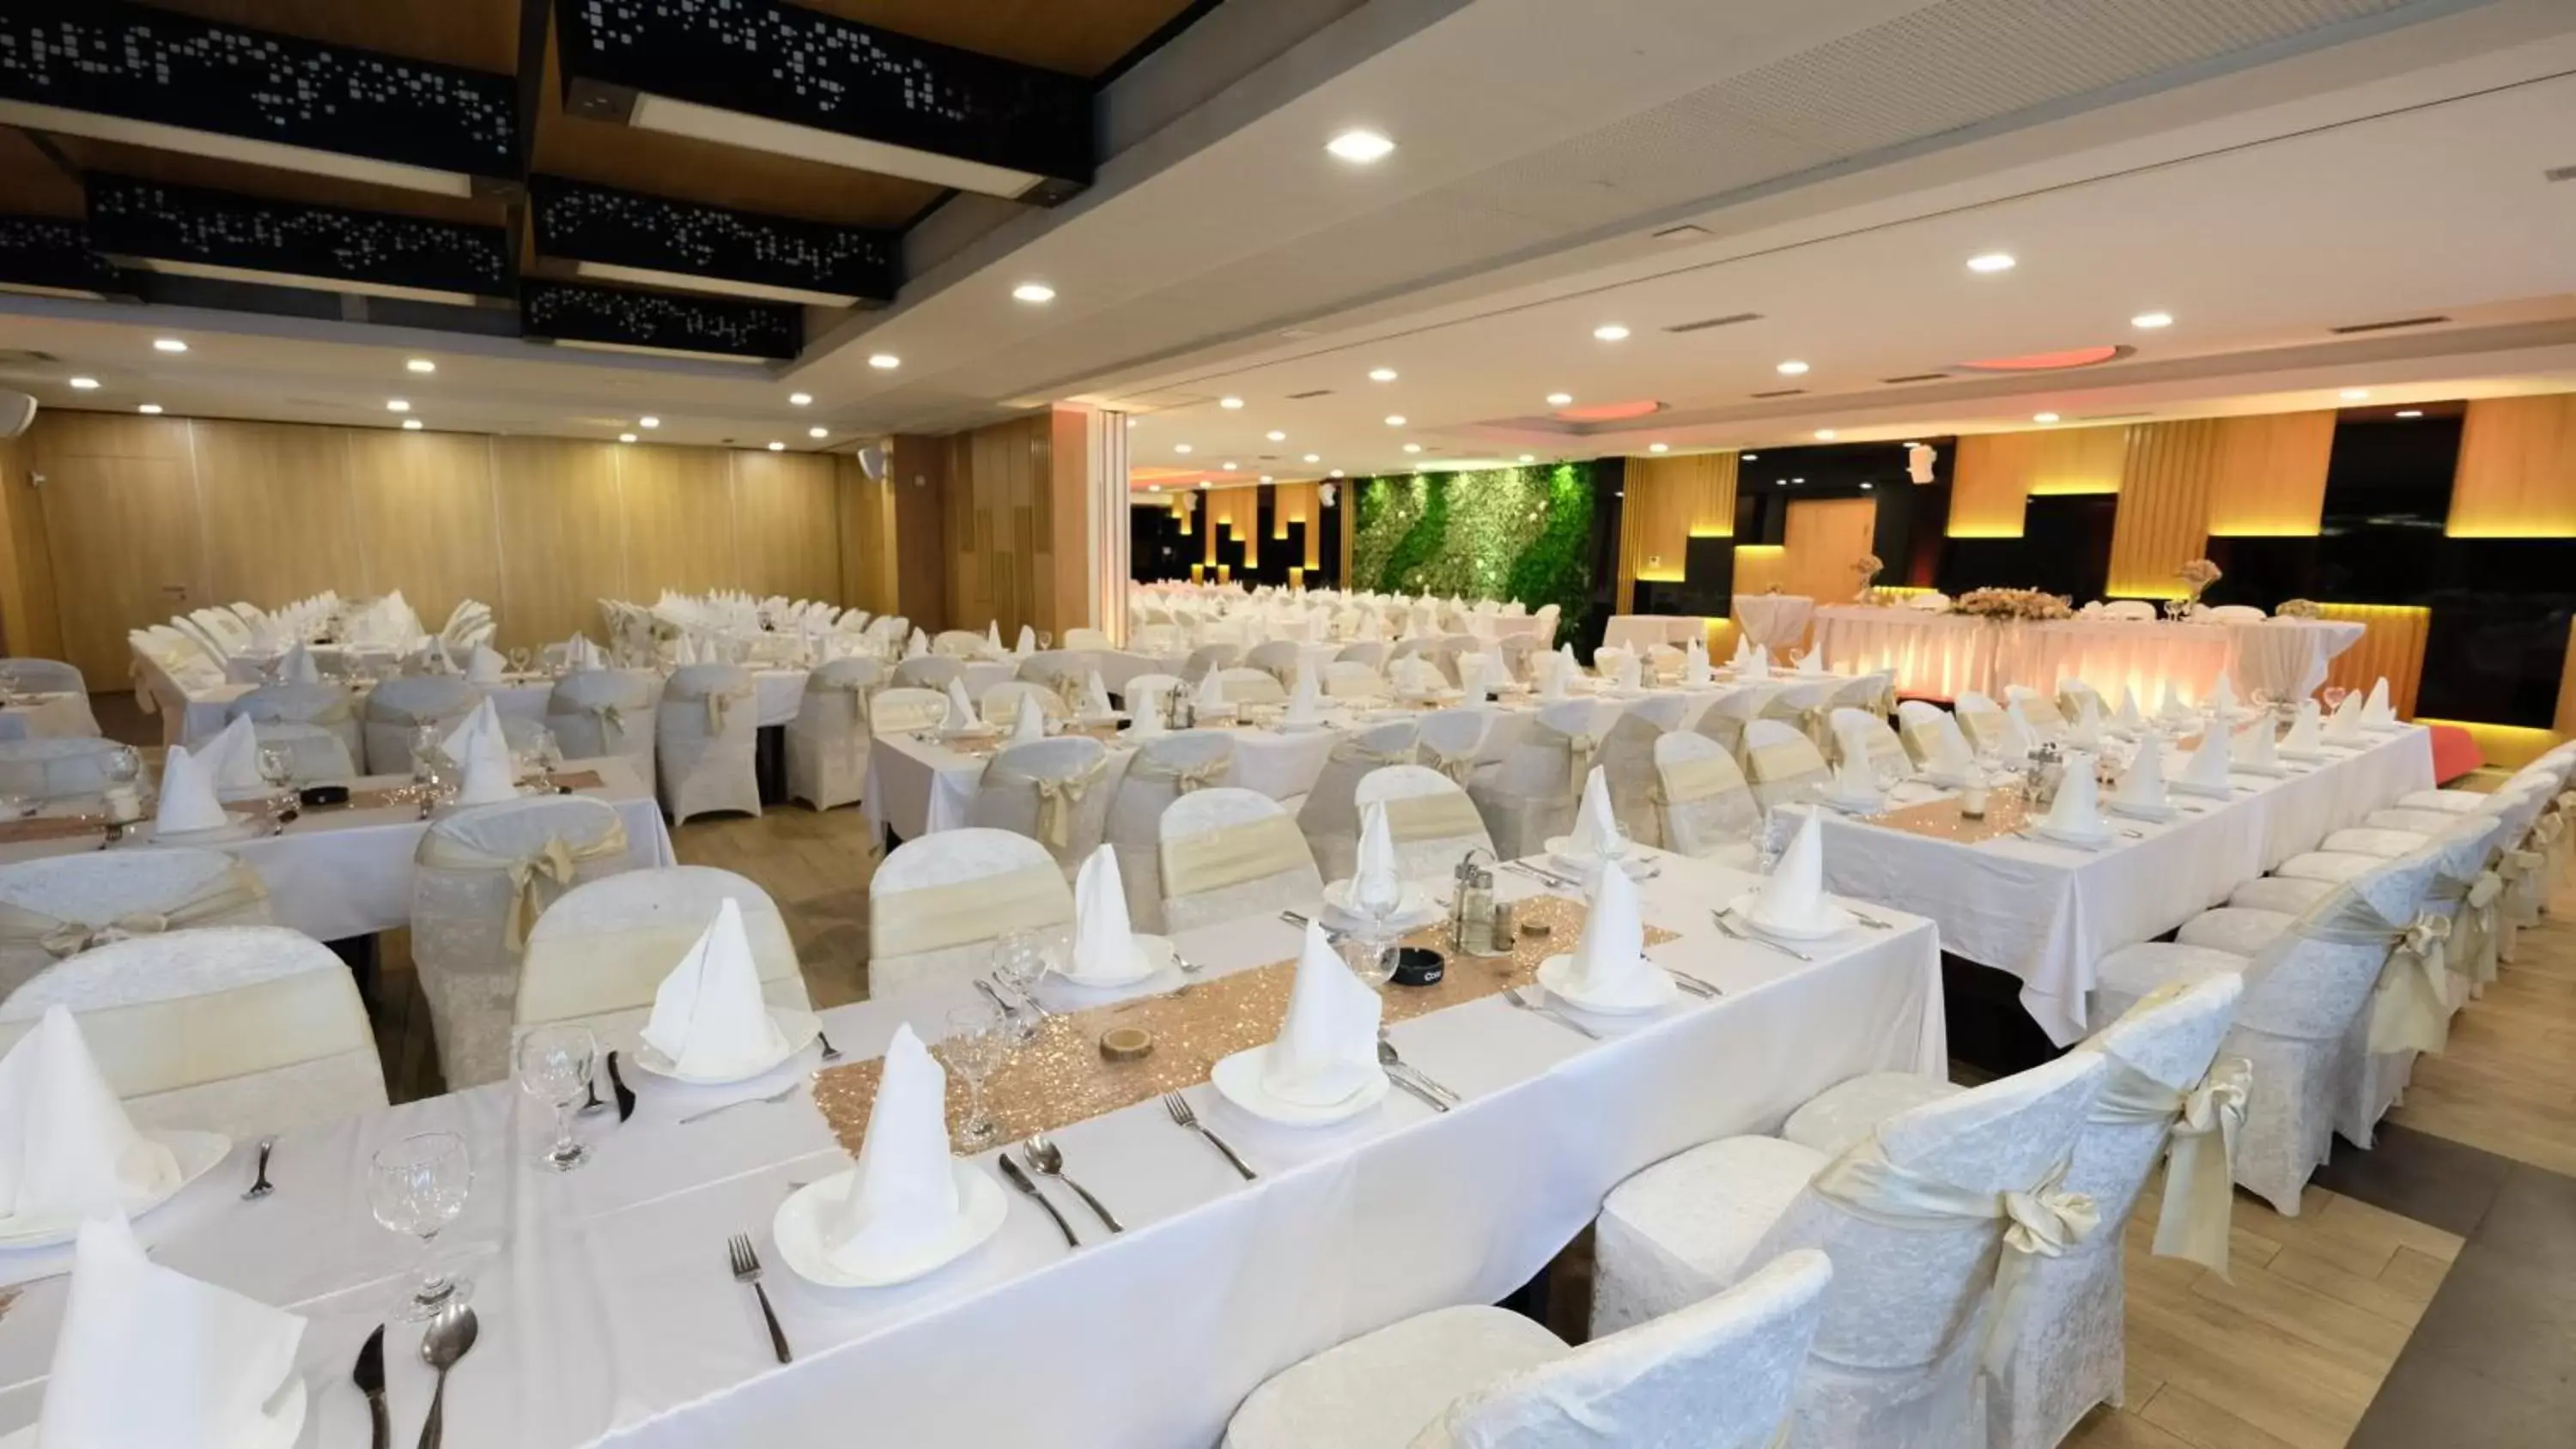 Business facilities, Banquet Facilities in Hollywood Hotel